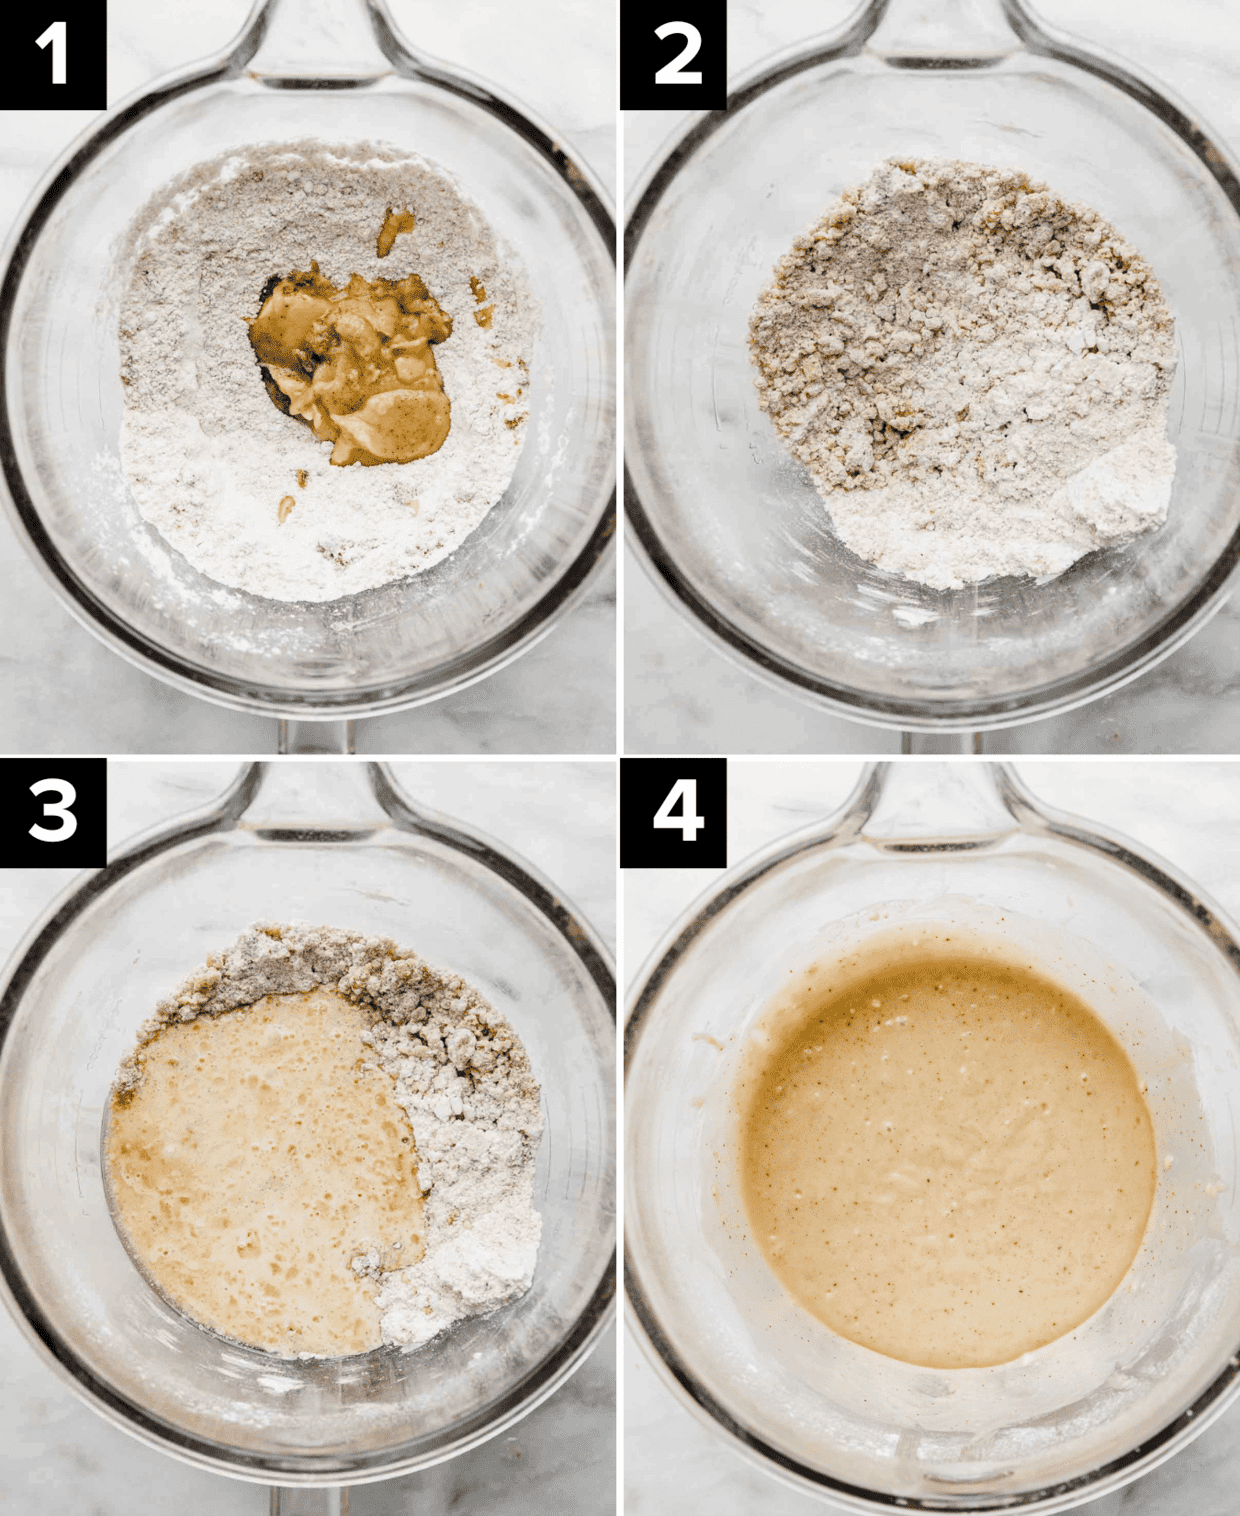 Four images showing a glass stand mixer bowl with flour and brown butter and other wet ingredients being added in segments to create a Butterscotch Cupcake batter.